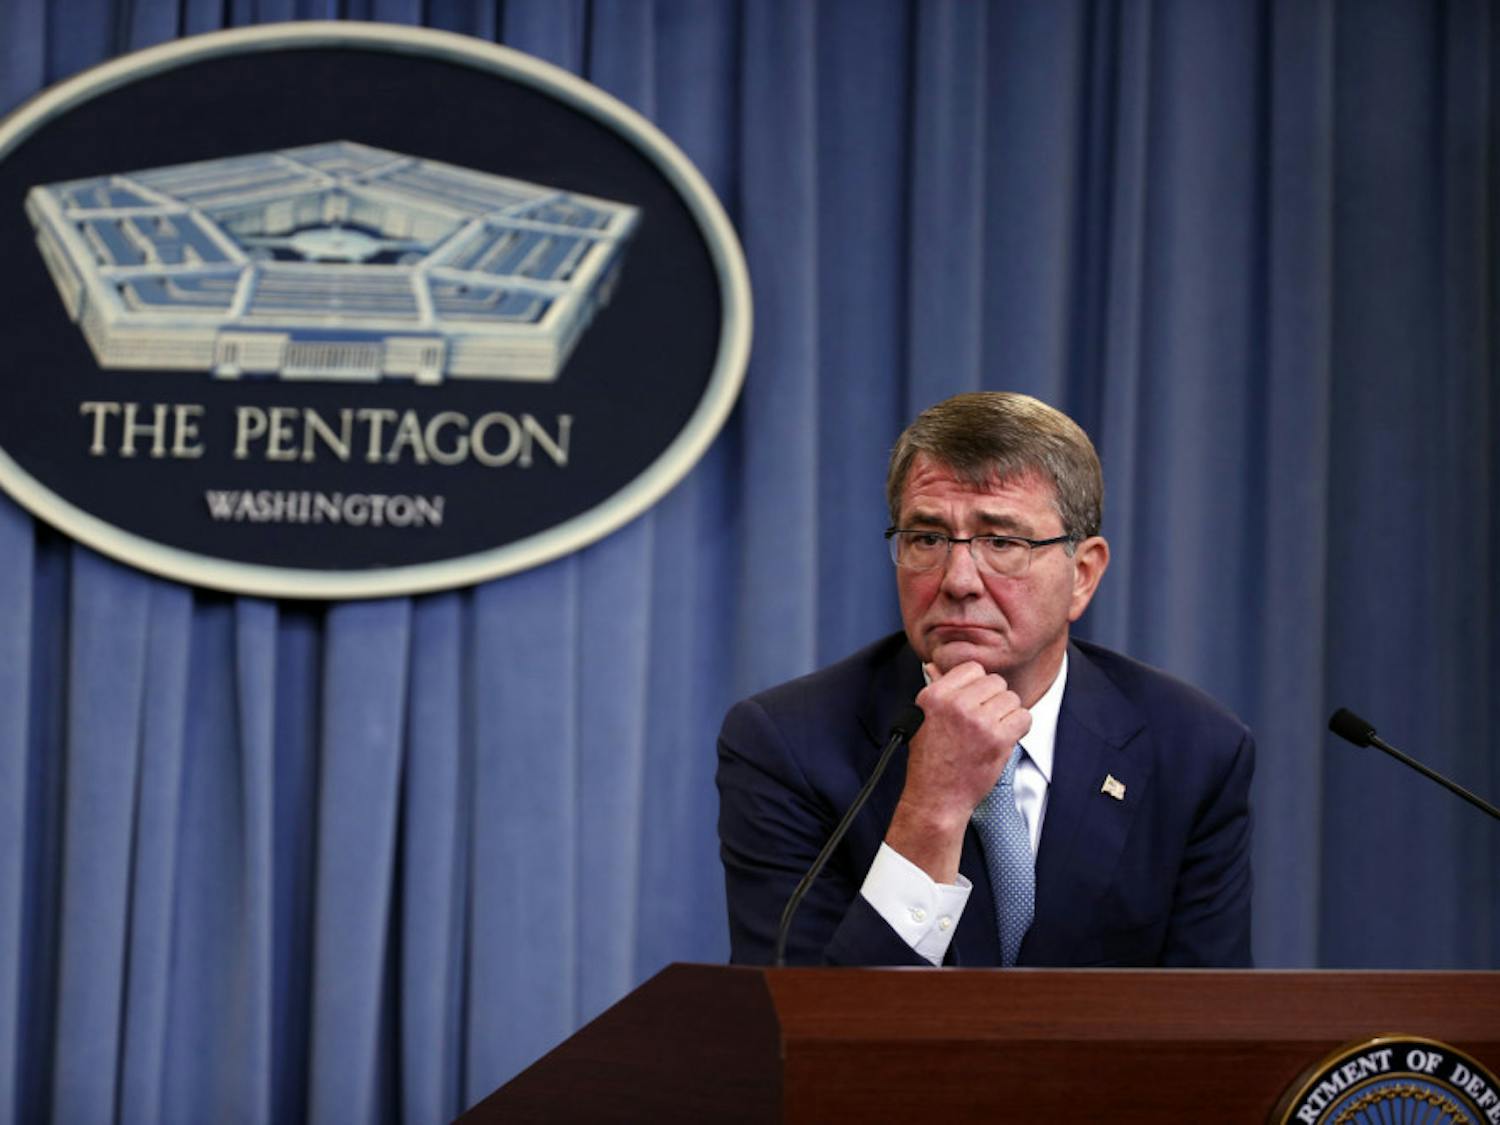 Defense Secretary Ash Carter listens to a question during a news conference at the Pentagon, Thursday, June 30, 2016, where he announced new rules allowing transgender individuals to serve openly in the U.S. military.